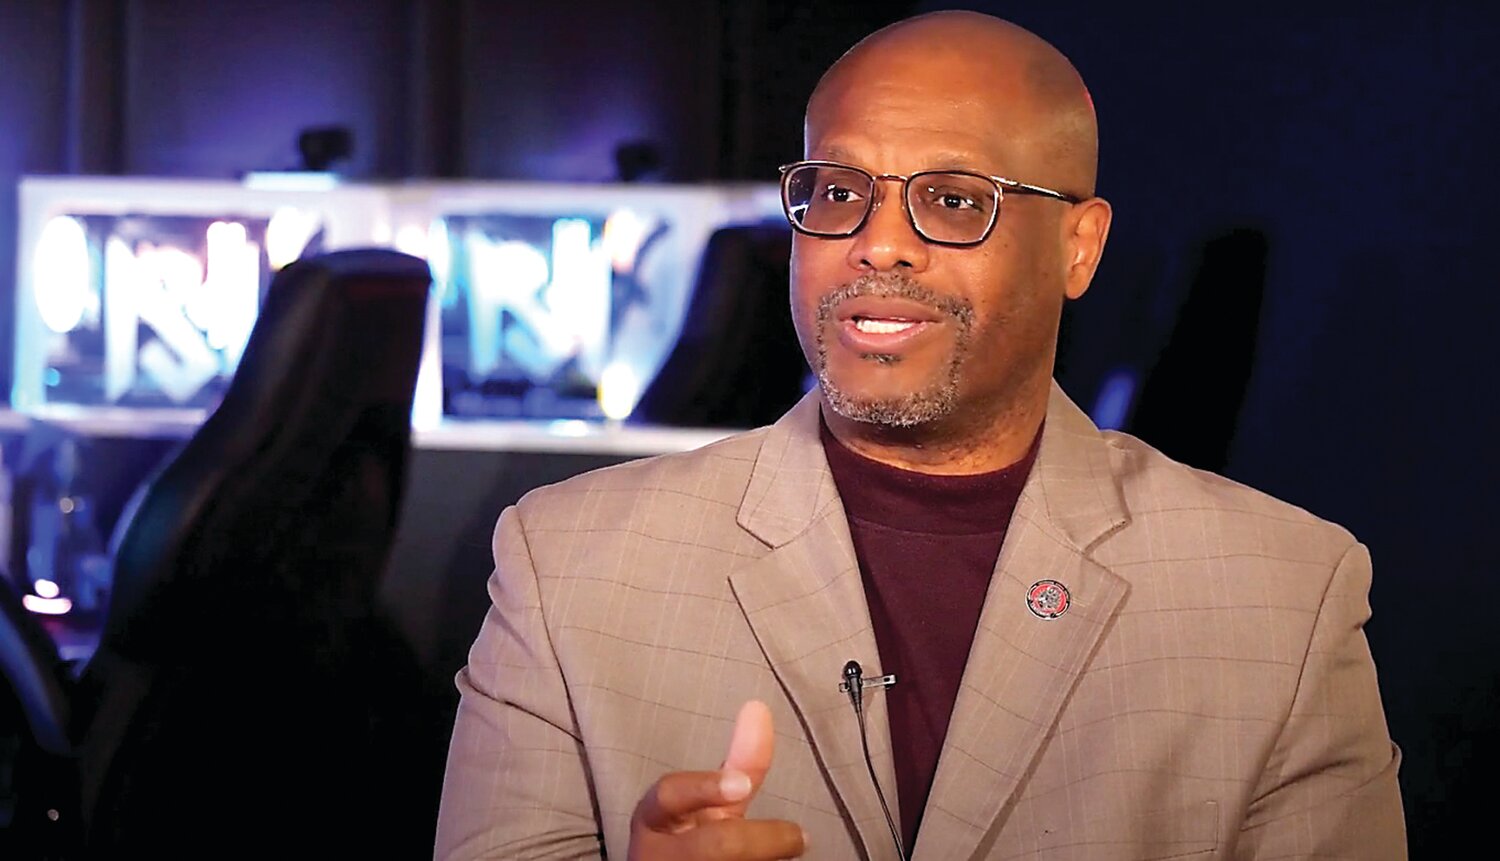 Centennial School District Superintendent Dr. Dana T. Bedden discusses the district’s “Level Up” partnership with Metro Esports and the local YMCA in a promotional video.